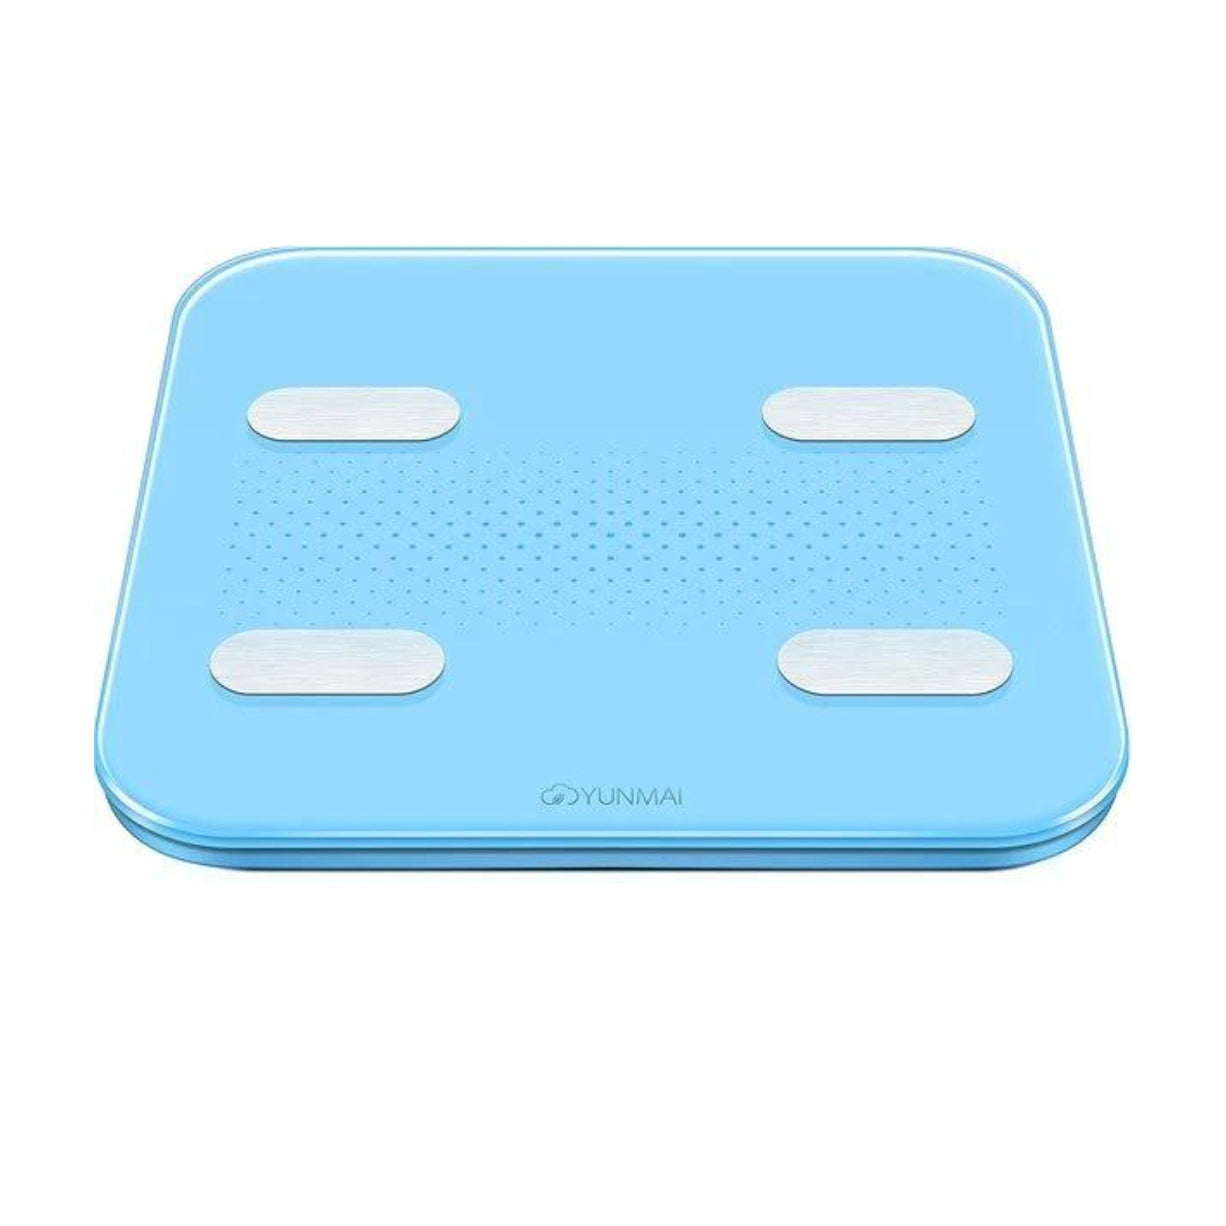 Yunmai Smart Scale S Blue for Weight and Body Fat with Rechargeable Ba